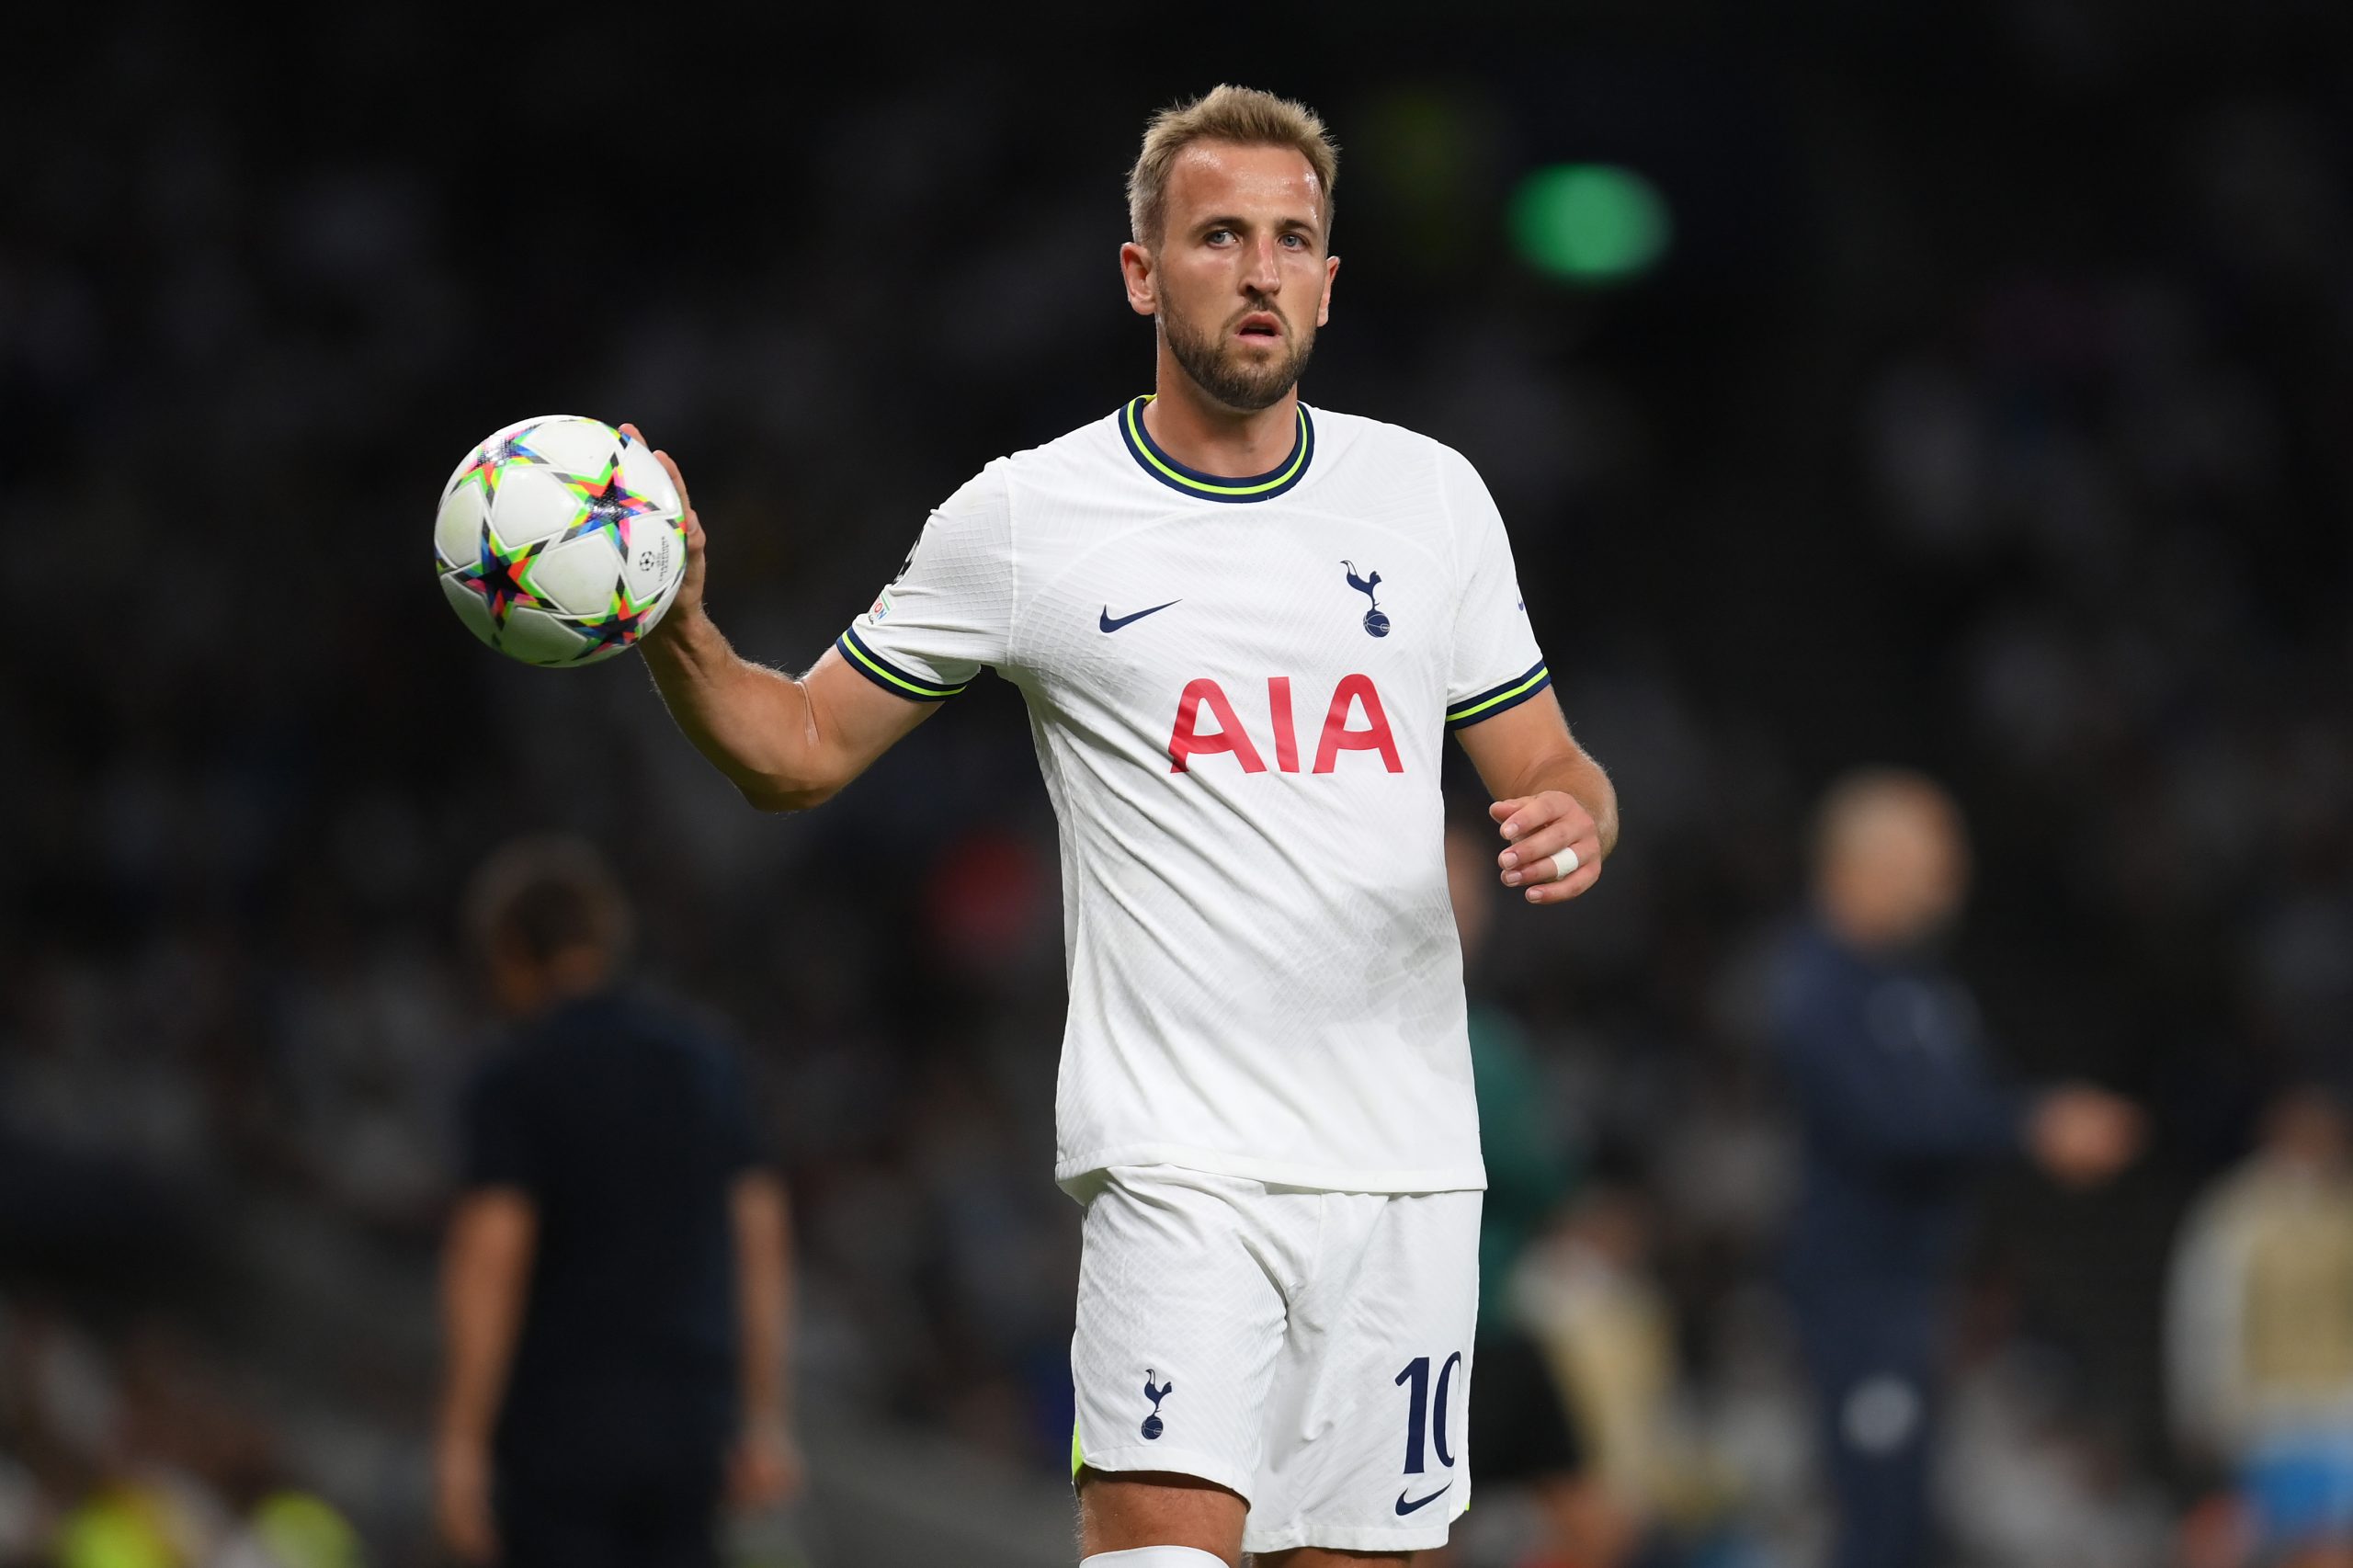 Gus Poyet feels Tottenham Hotspur star Harry Kane is an all-rounder in comparison to Erling Haaland.